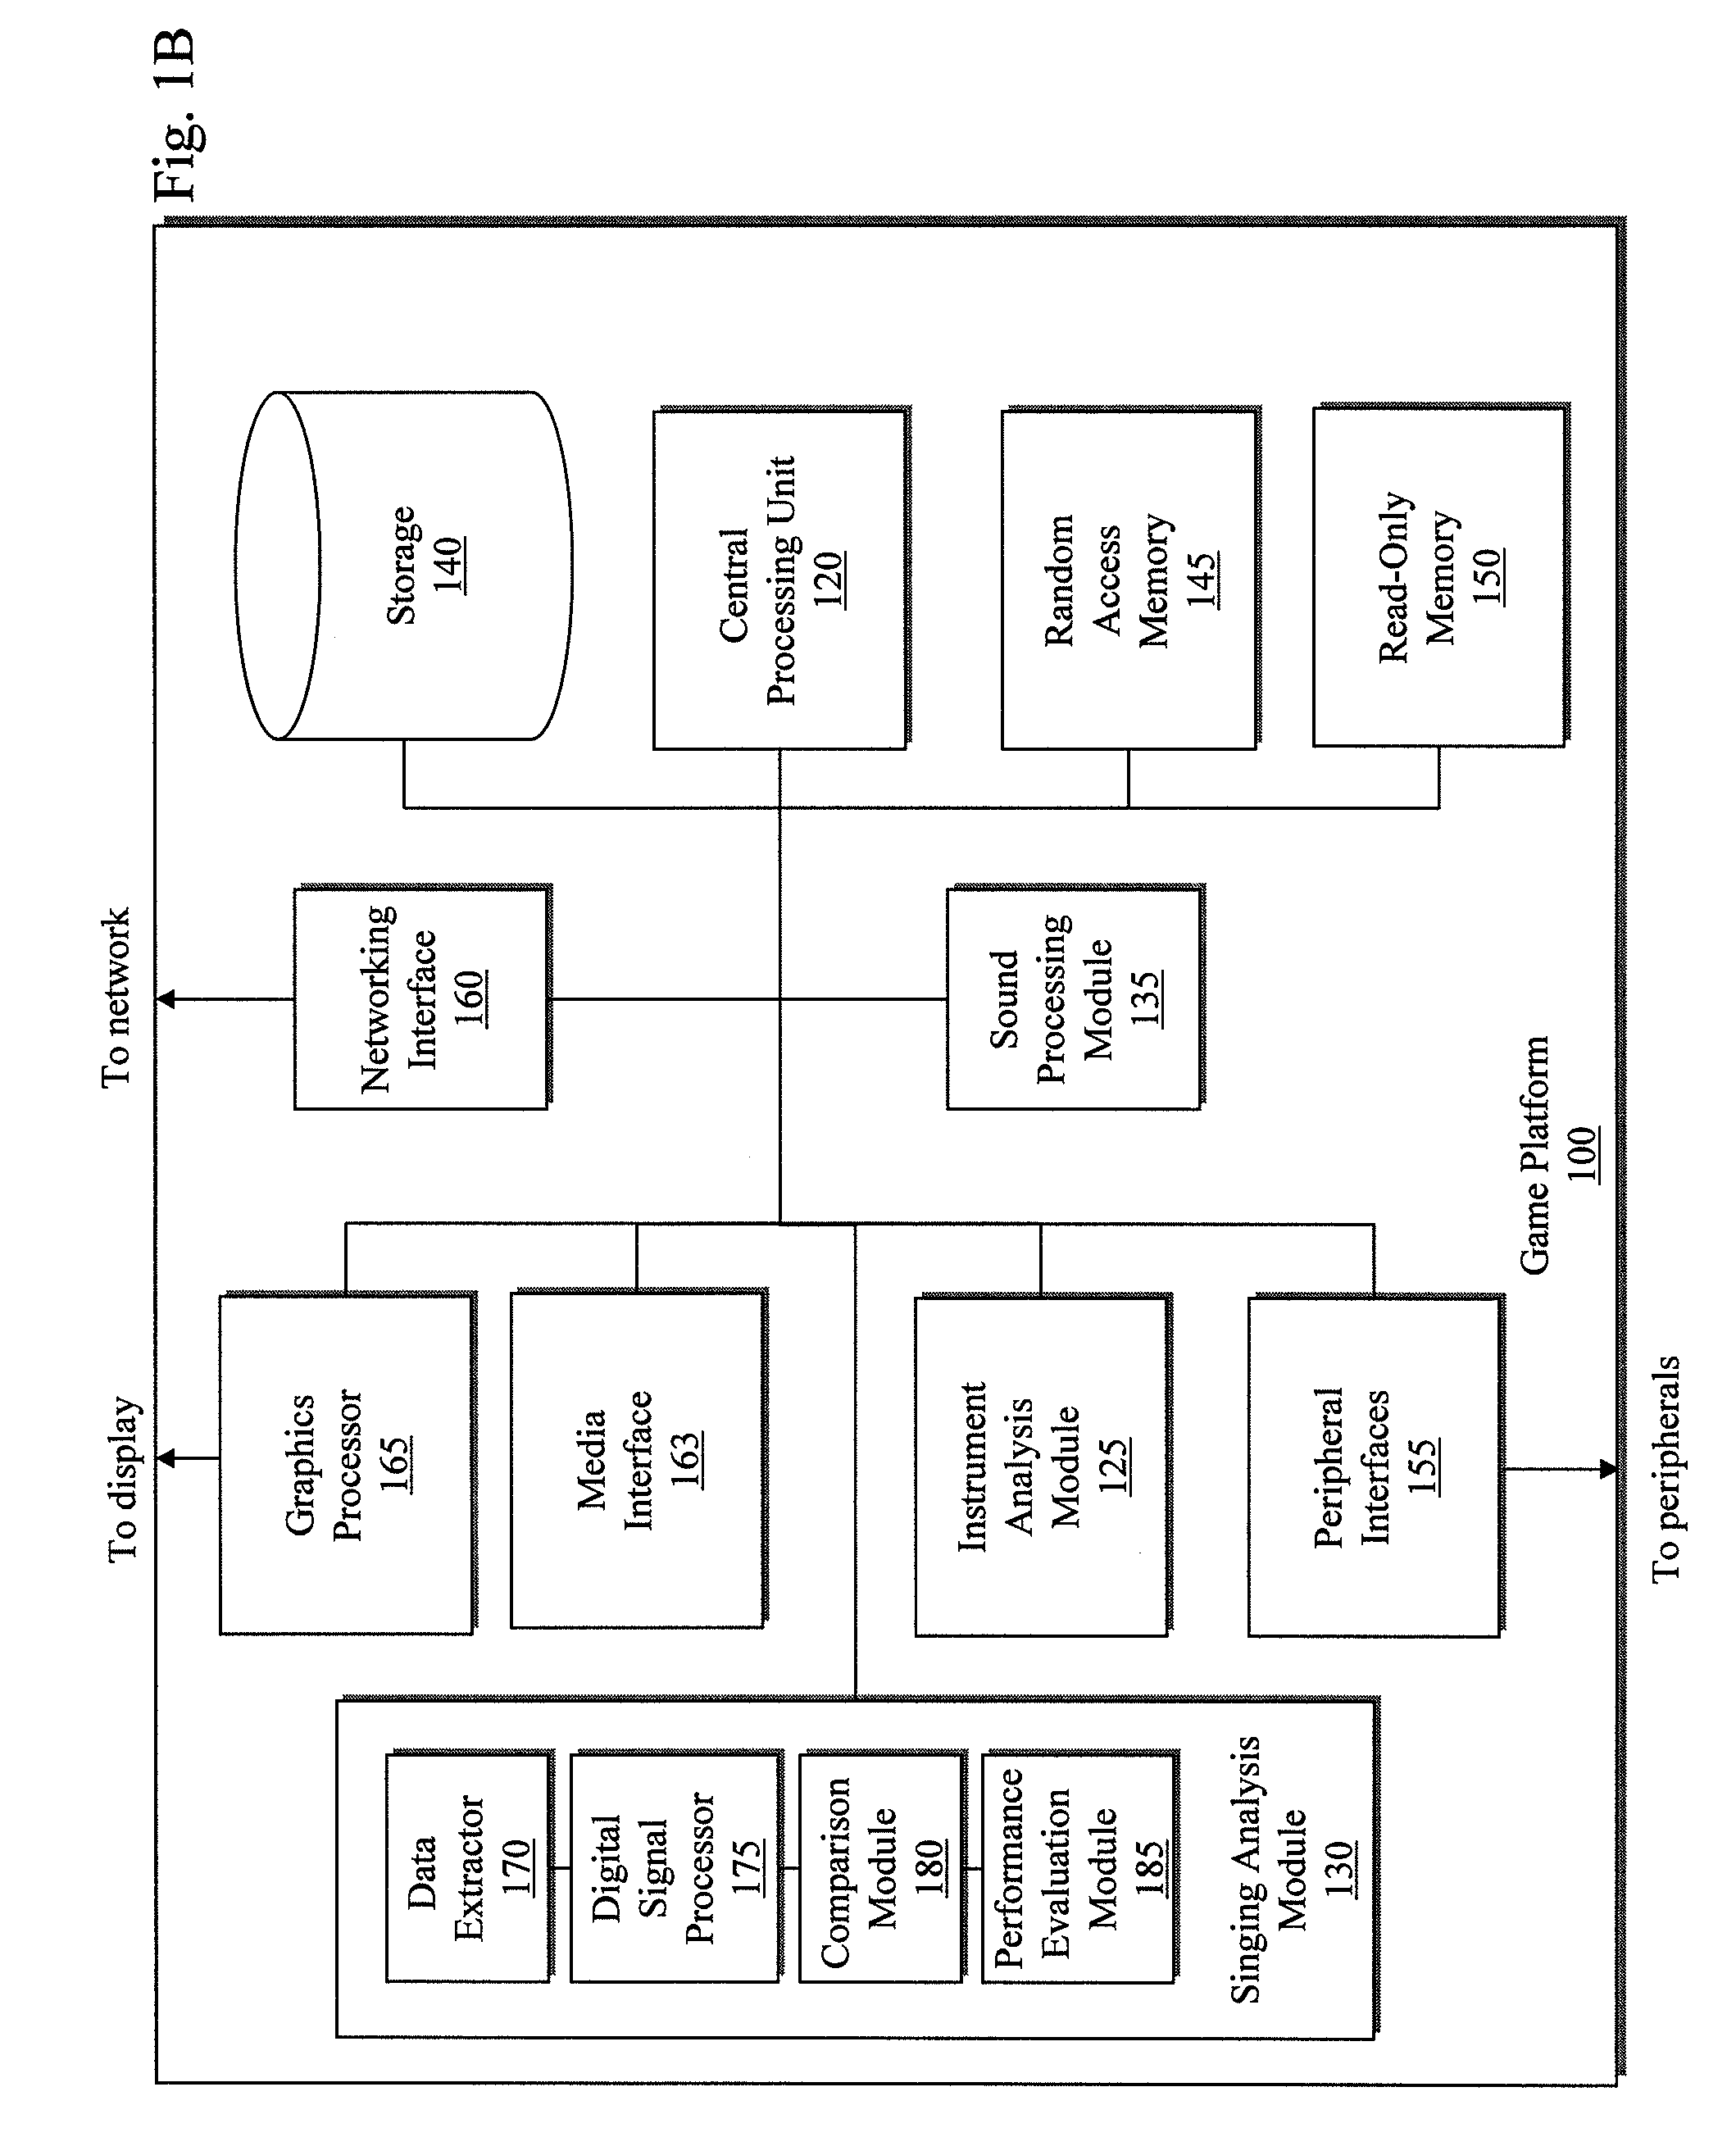 Scoring a Musical Performance Involving Multiple Parts